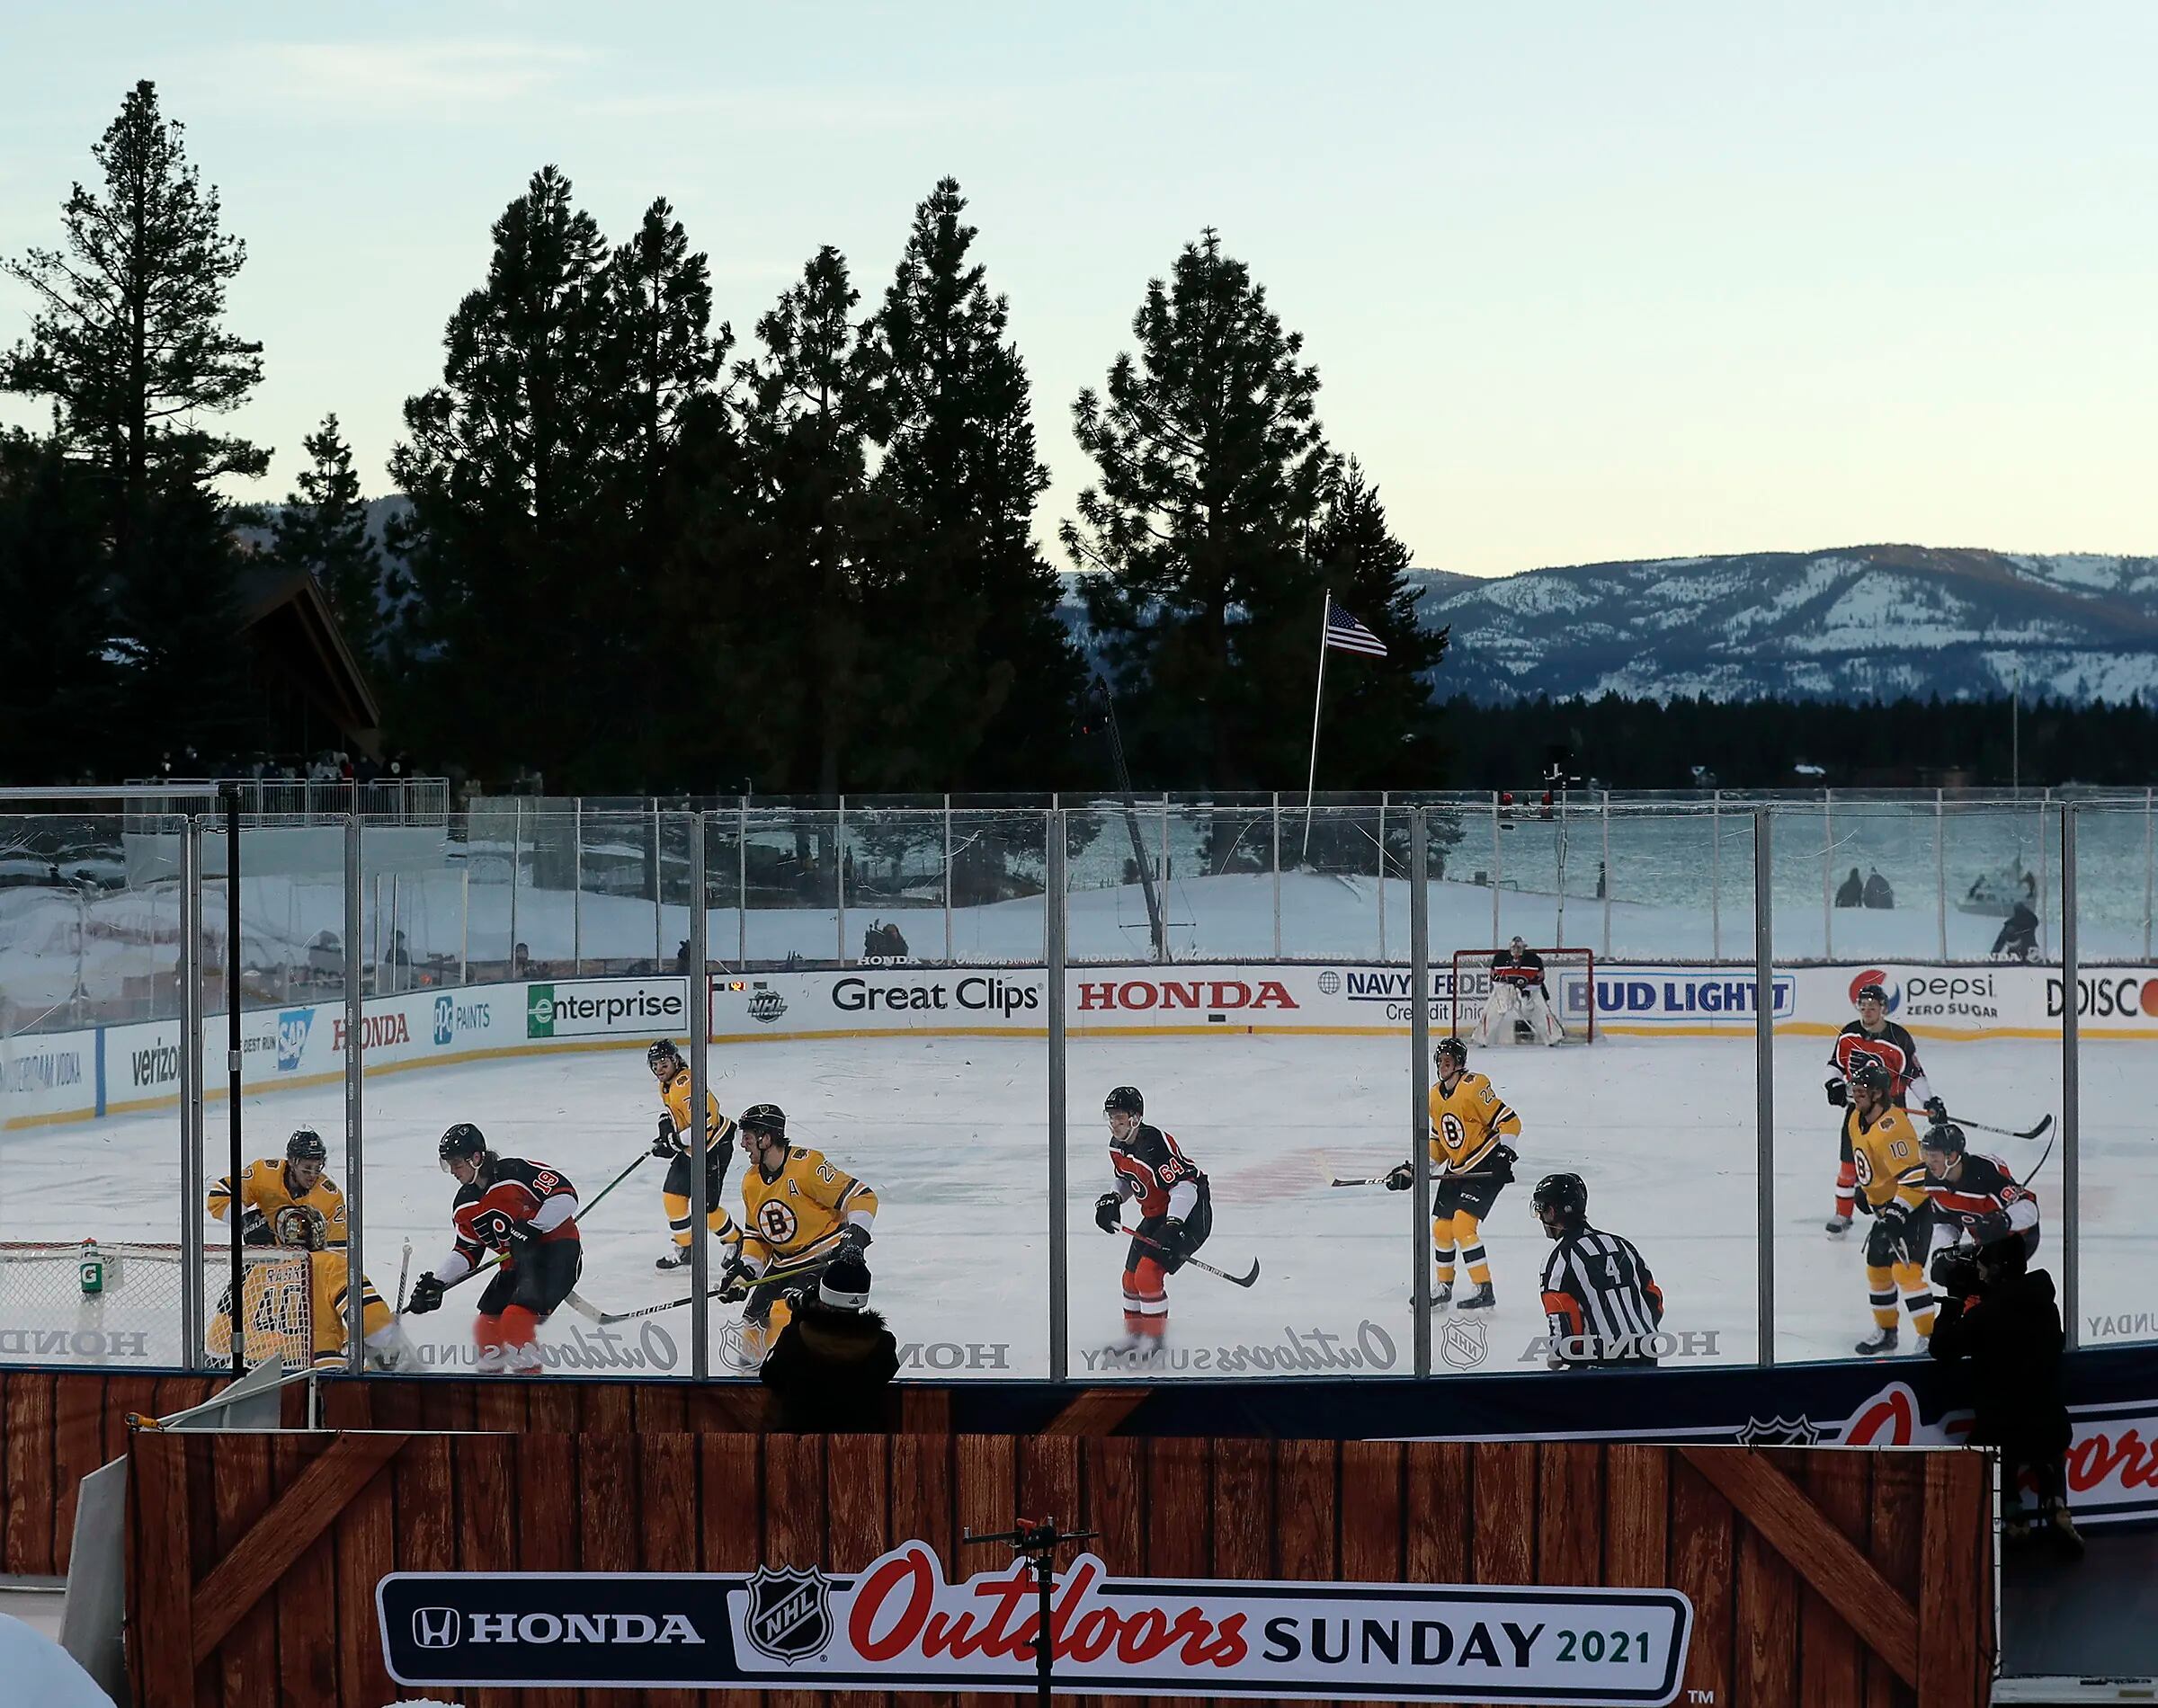 Bruins vs. Flyers at Lake Tahoe: Setting is 'mic drop' moment for outdoor  NHL games 